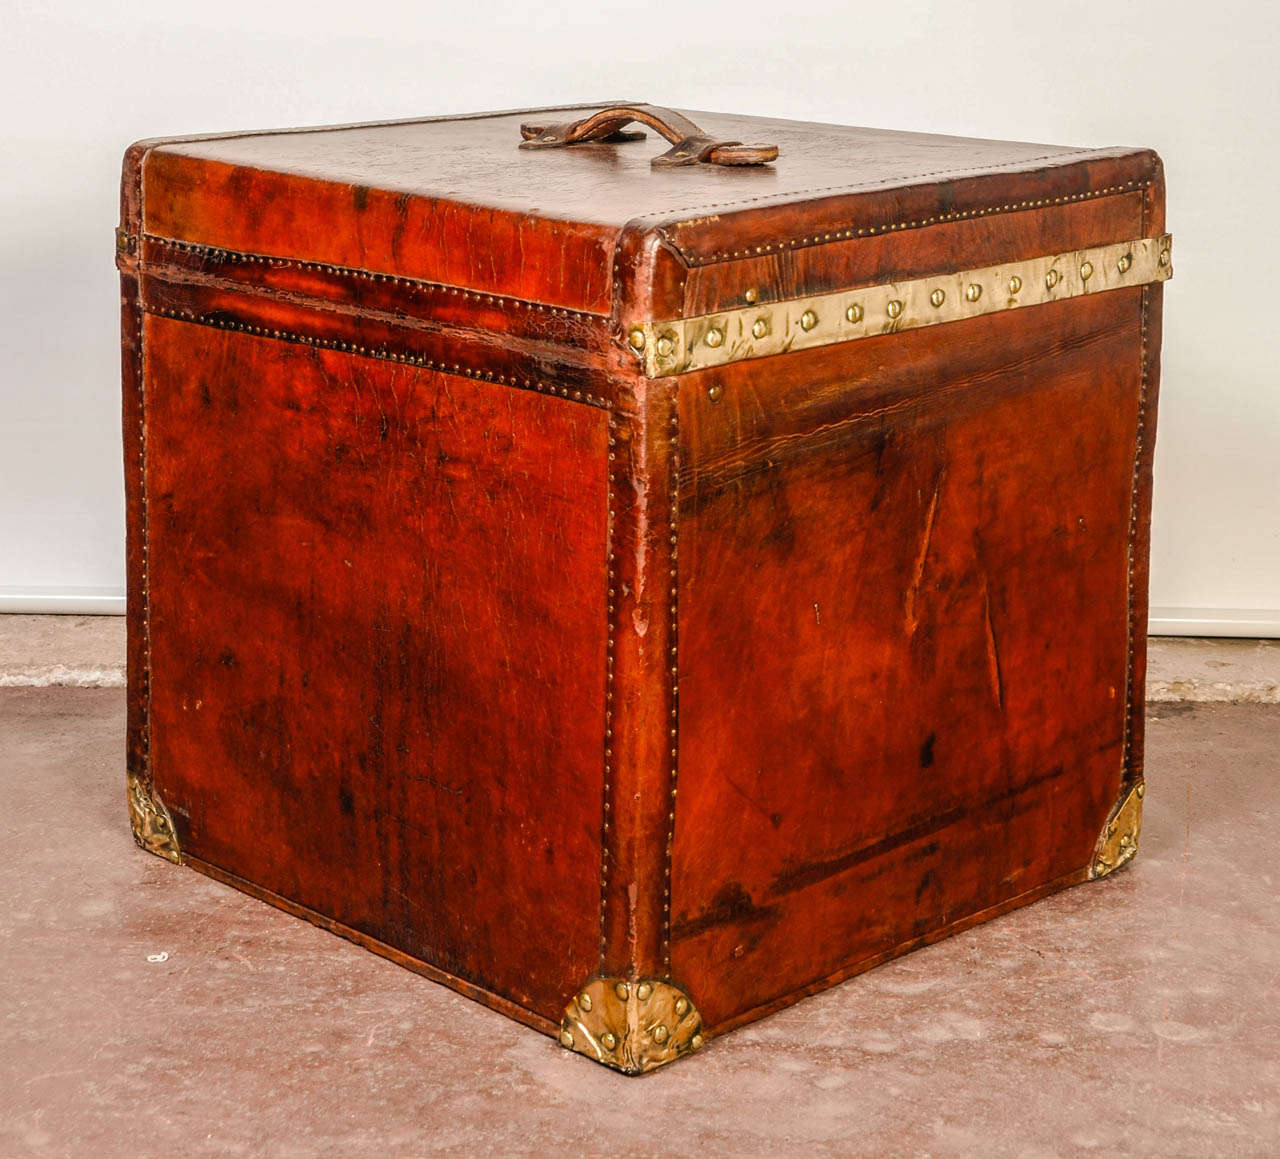 It is a large 19th century leather hat box that has a beautiful patina.Its frame is wood,so it is very sturdy.There is a very nice job of brass surrounding and brass lock.
Inside has been recently relined with fabric.
It is all original and could